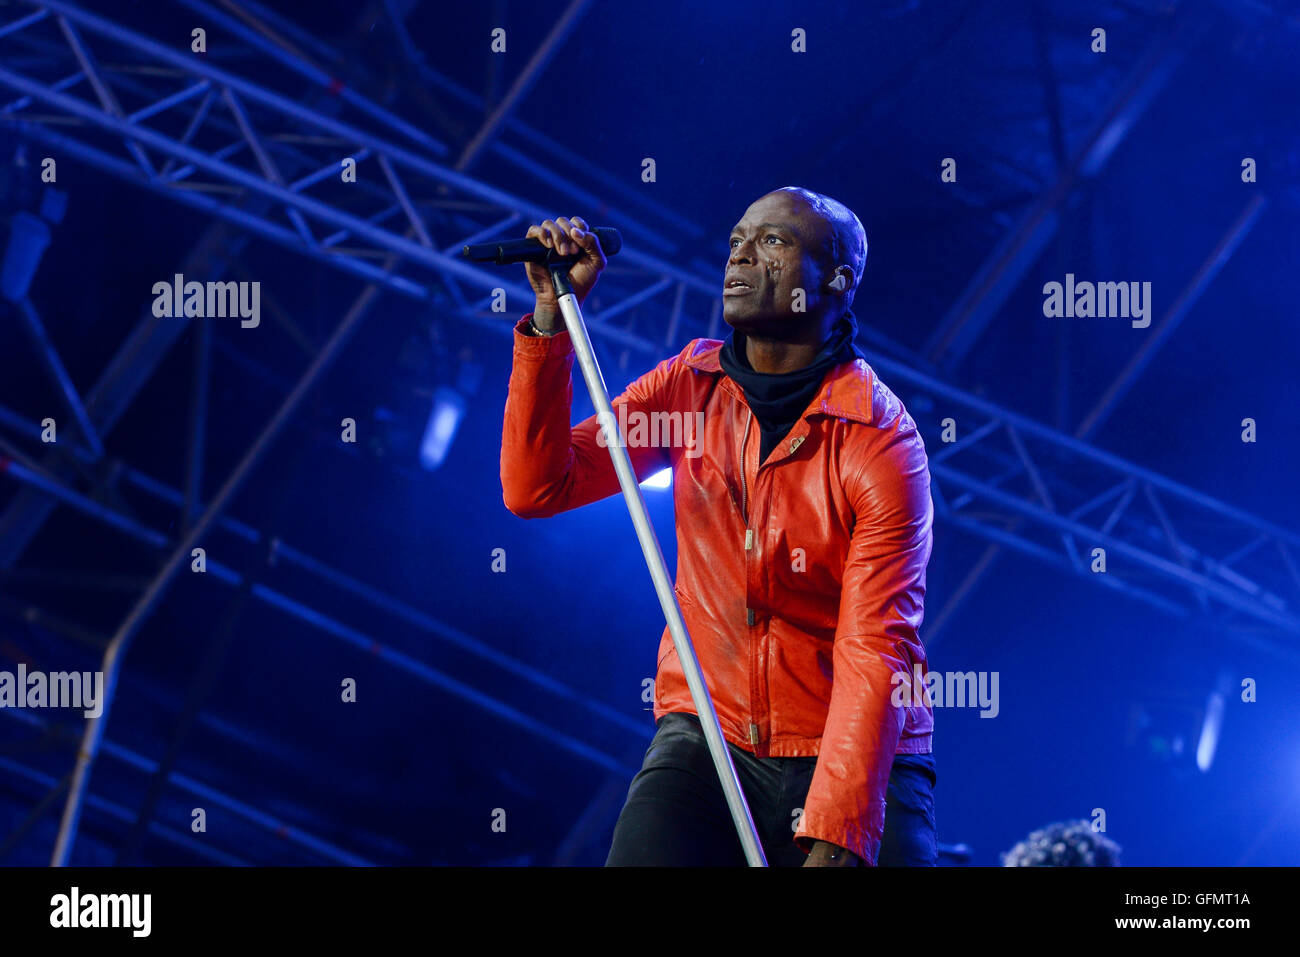 Carfest North, Bolesworth, Cheshire, UK. 31st July 2016. Seal performing on the main stage. The event is the brainchild of Chris Evans and features 3 days of cars, music and entertainment with profits being donated to the charity Children in Need. Andrew Paterson/Alamy Live News Stock Photo